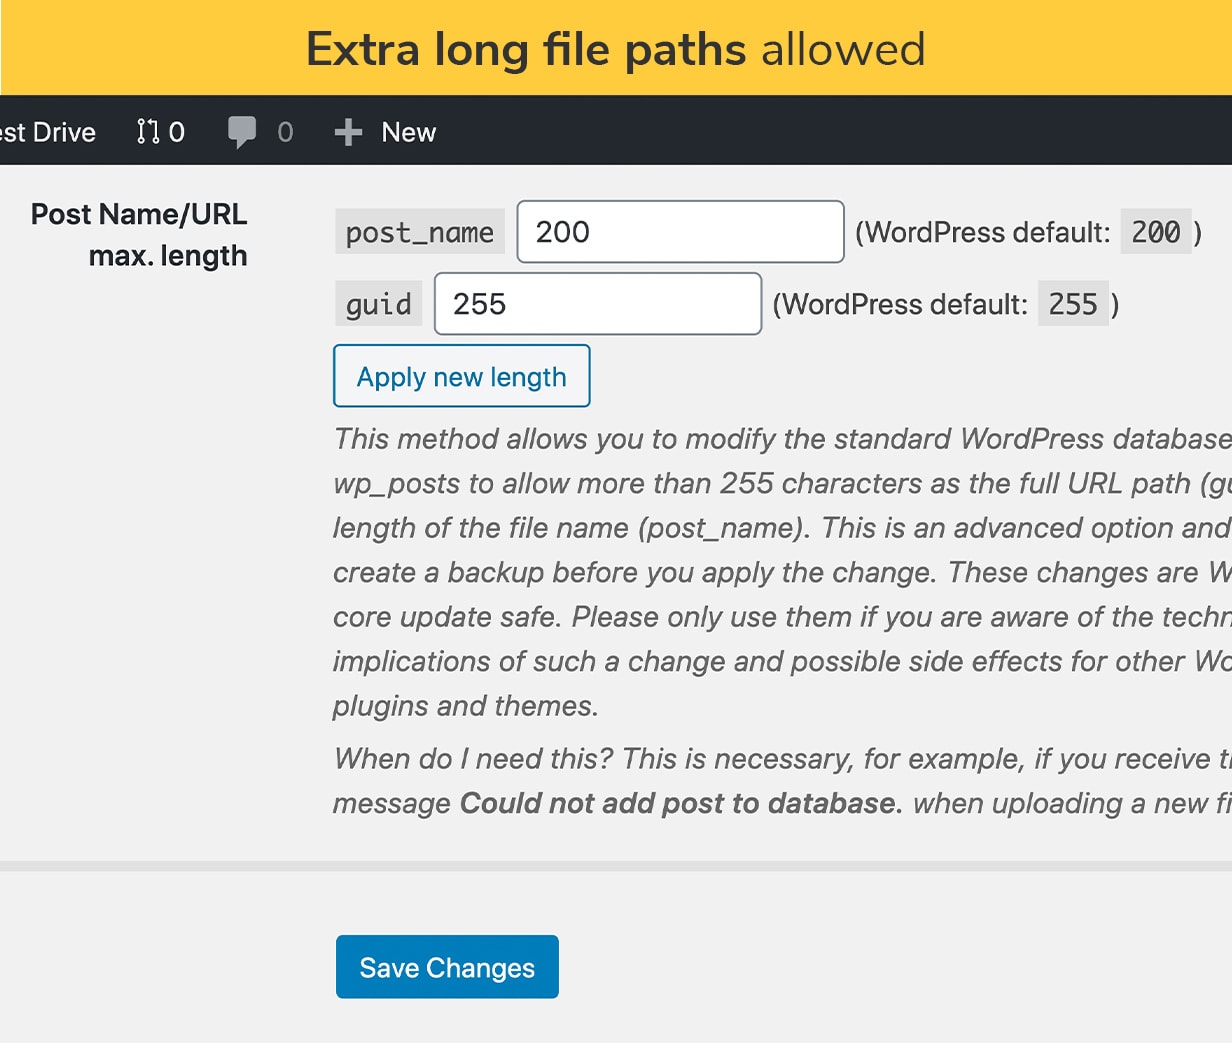 Extra long file paths allowed